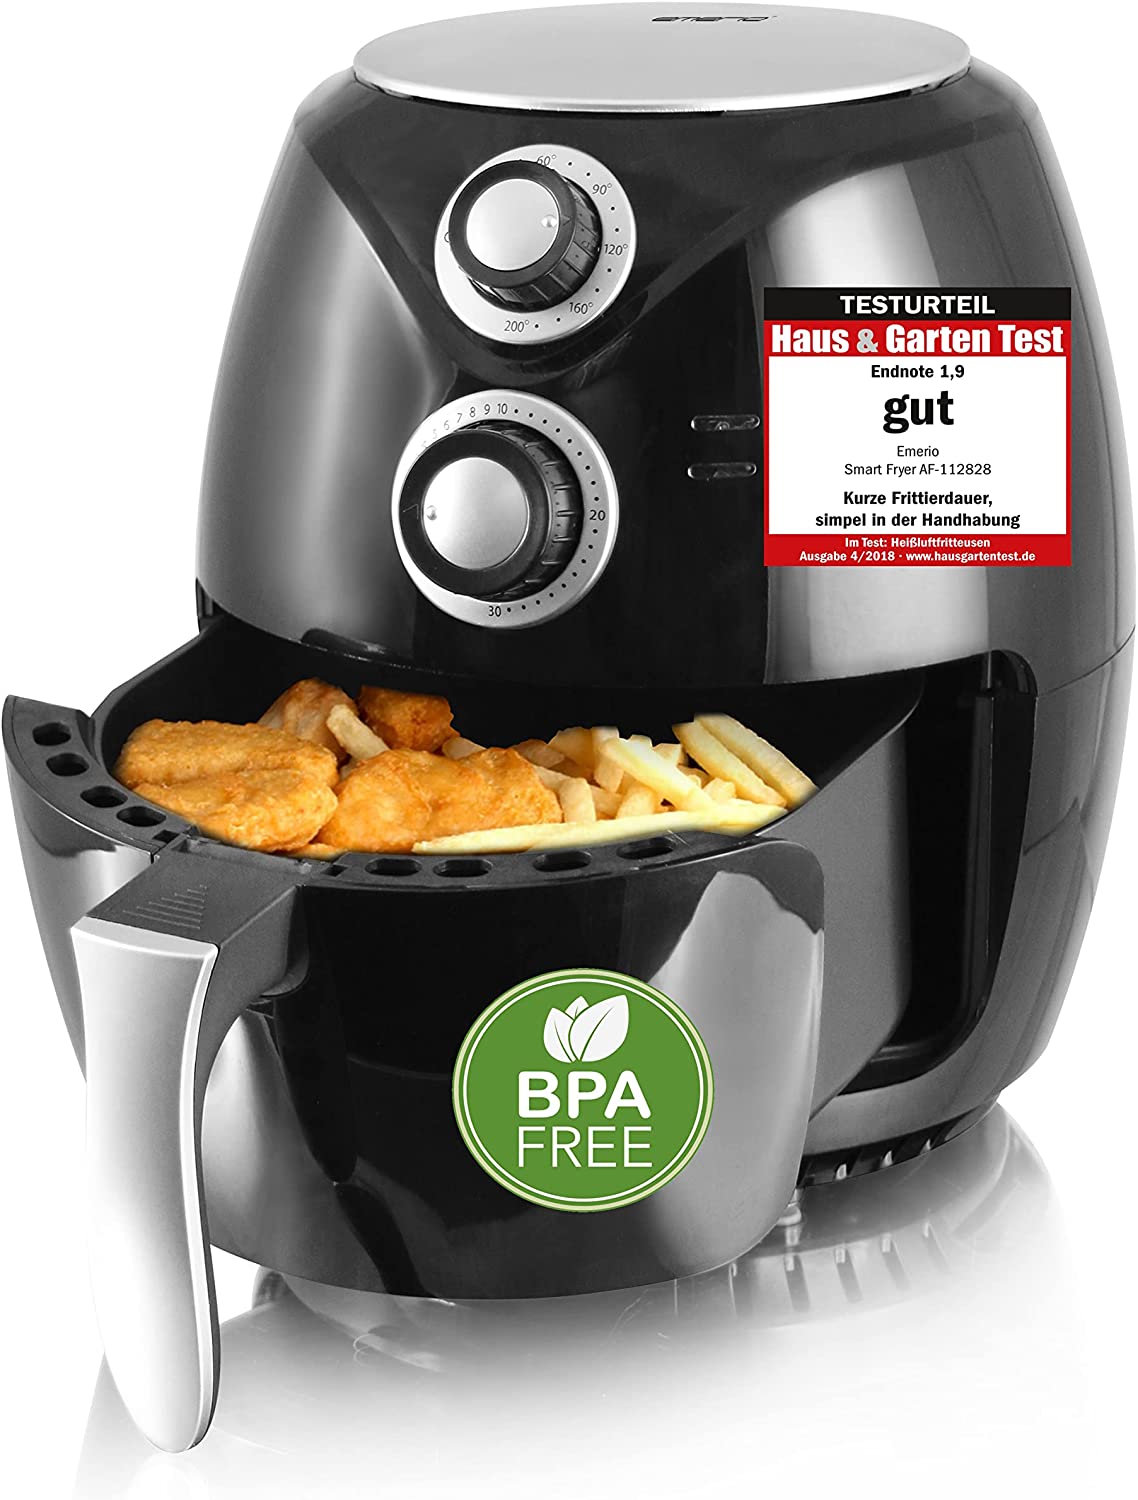 Emerio Smartfryer Airfry Hot Air Frying With Hot Air Without Additional Oil Healthier Frying 3.6 Litre Volume Cool Touch BPA Free Quick Heating 1450 Watt Good With 1.9